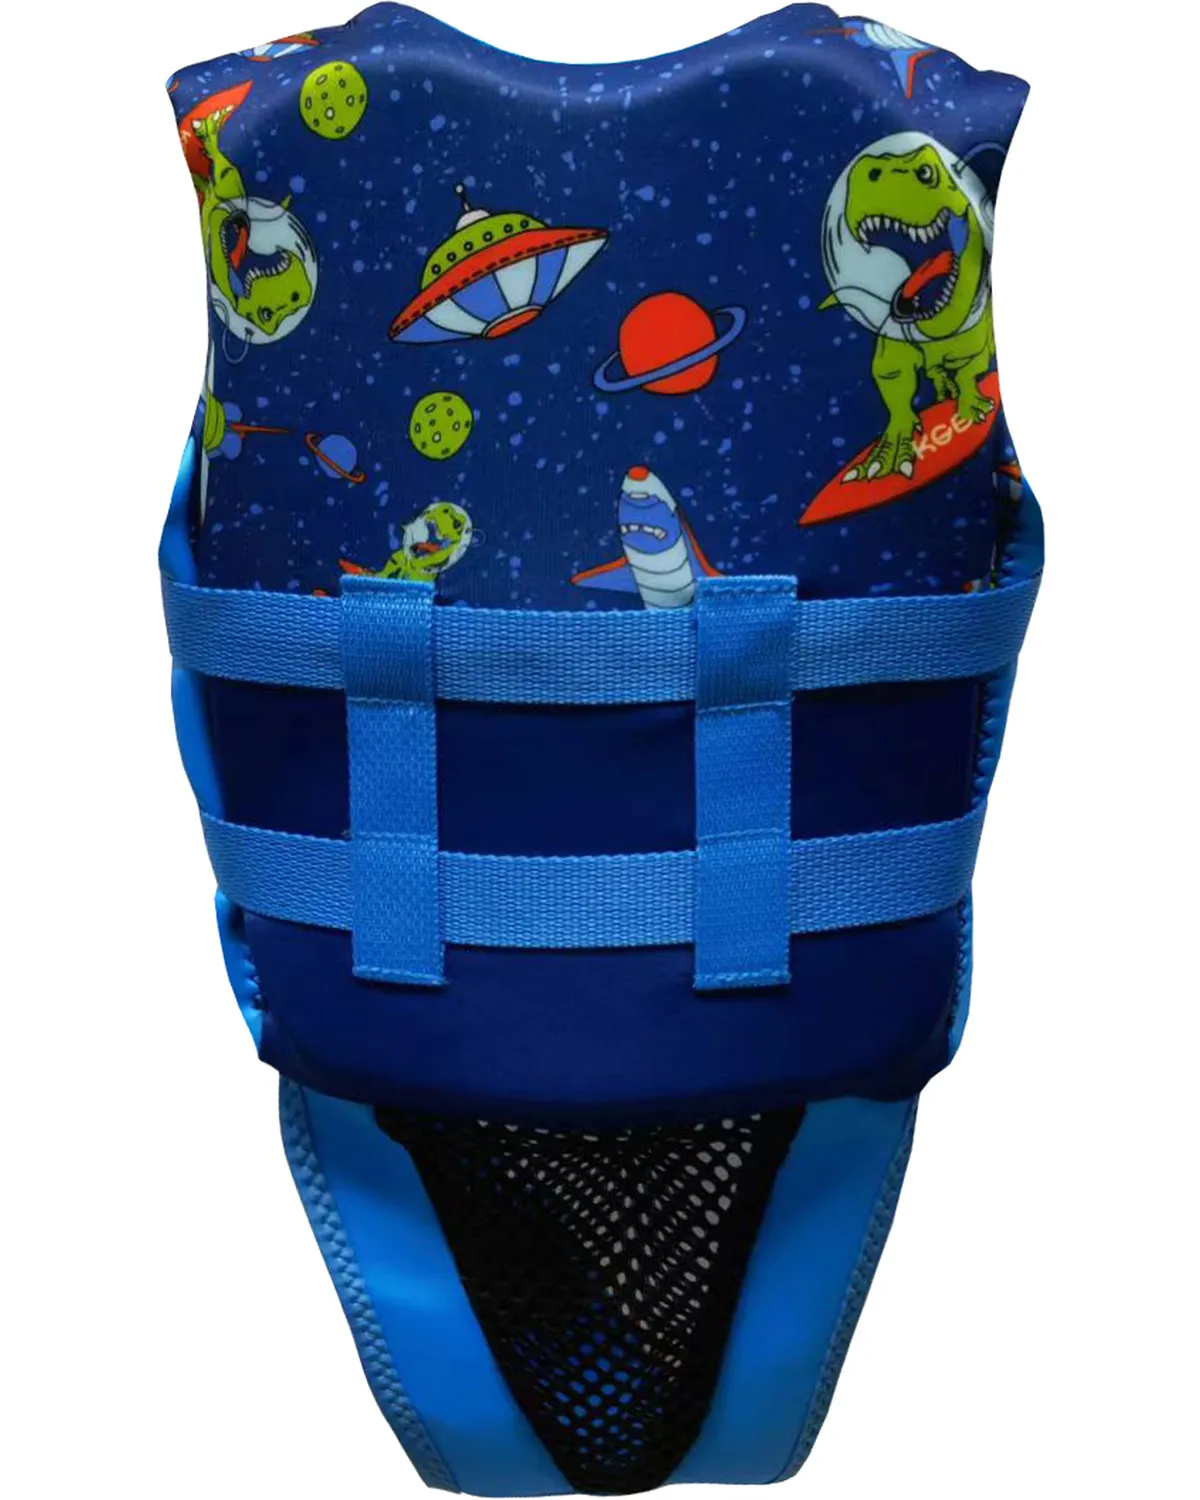 KGB Boys Life Jacket - Out of Space